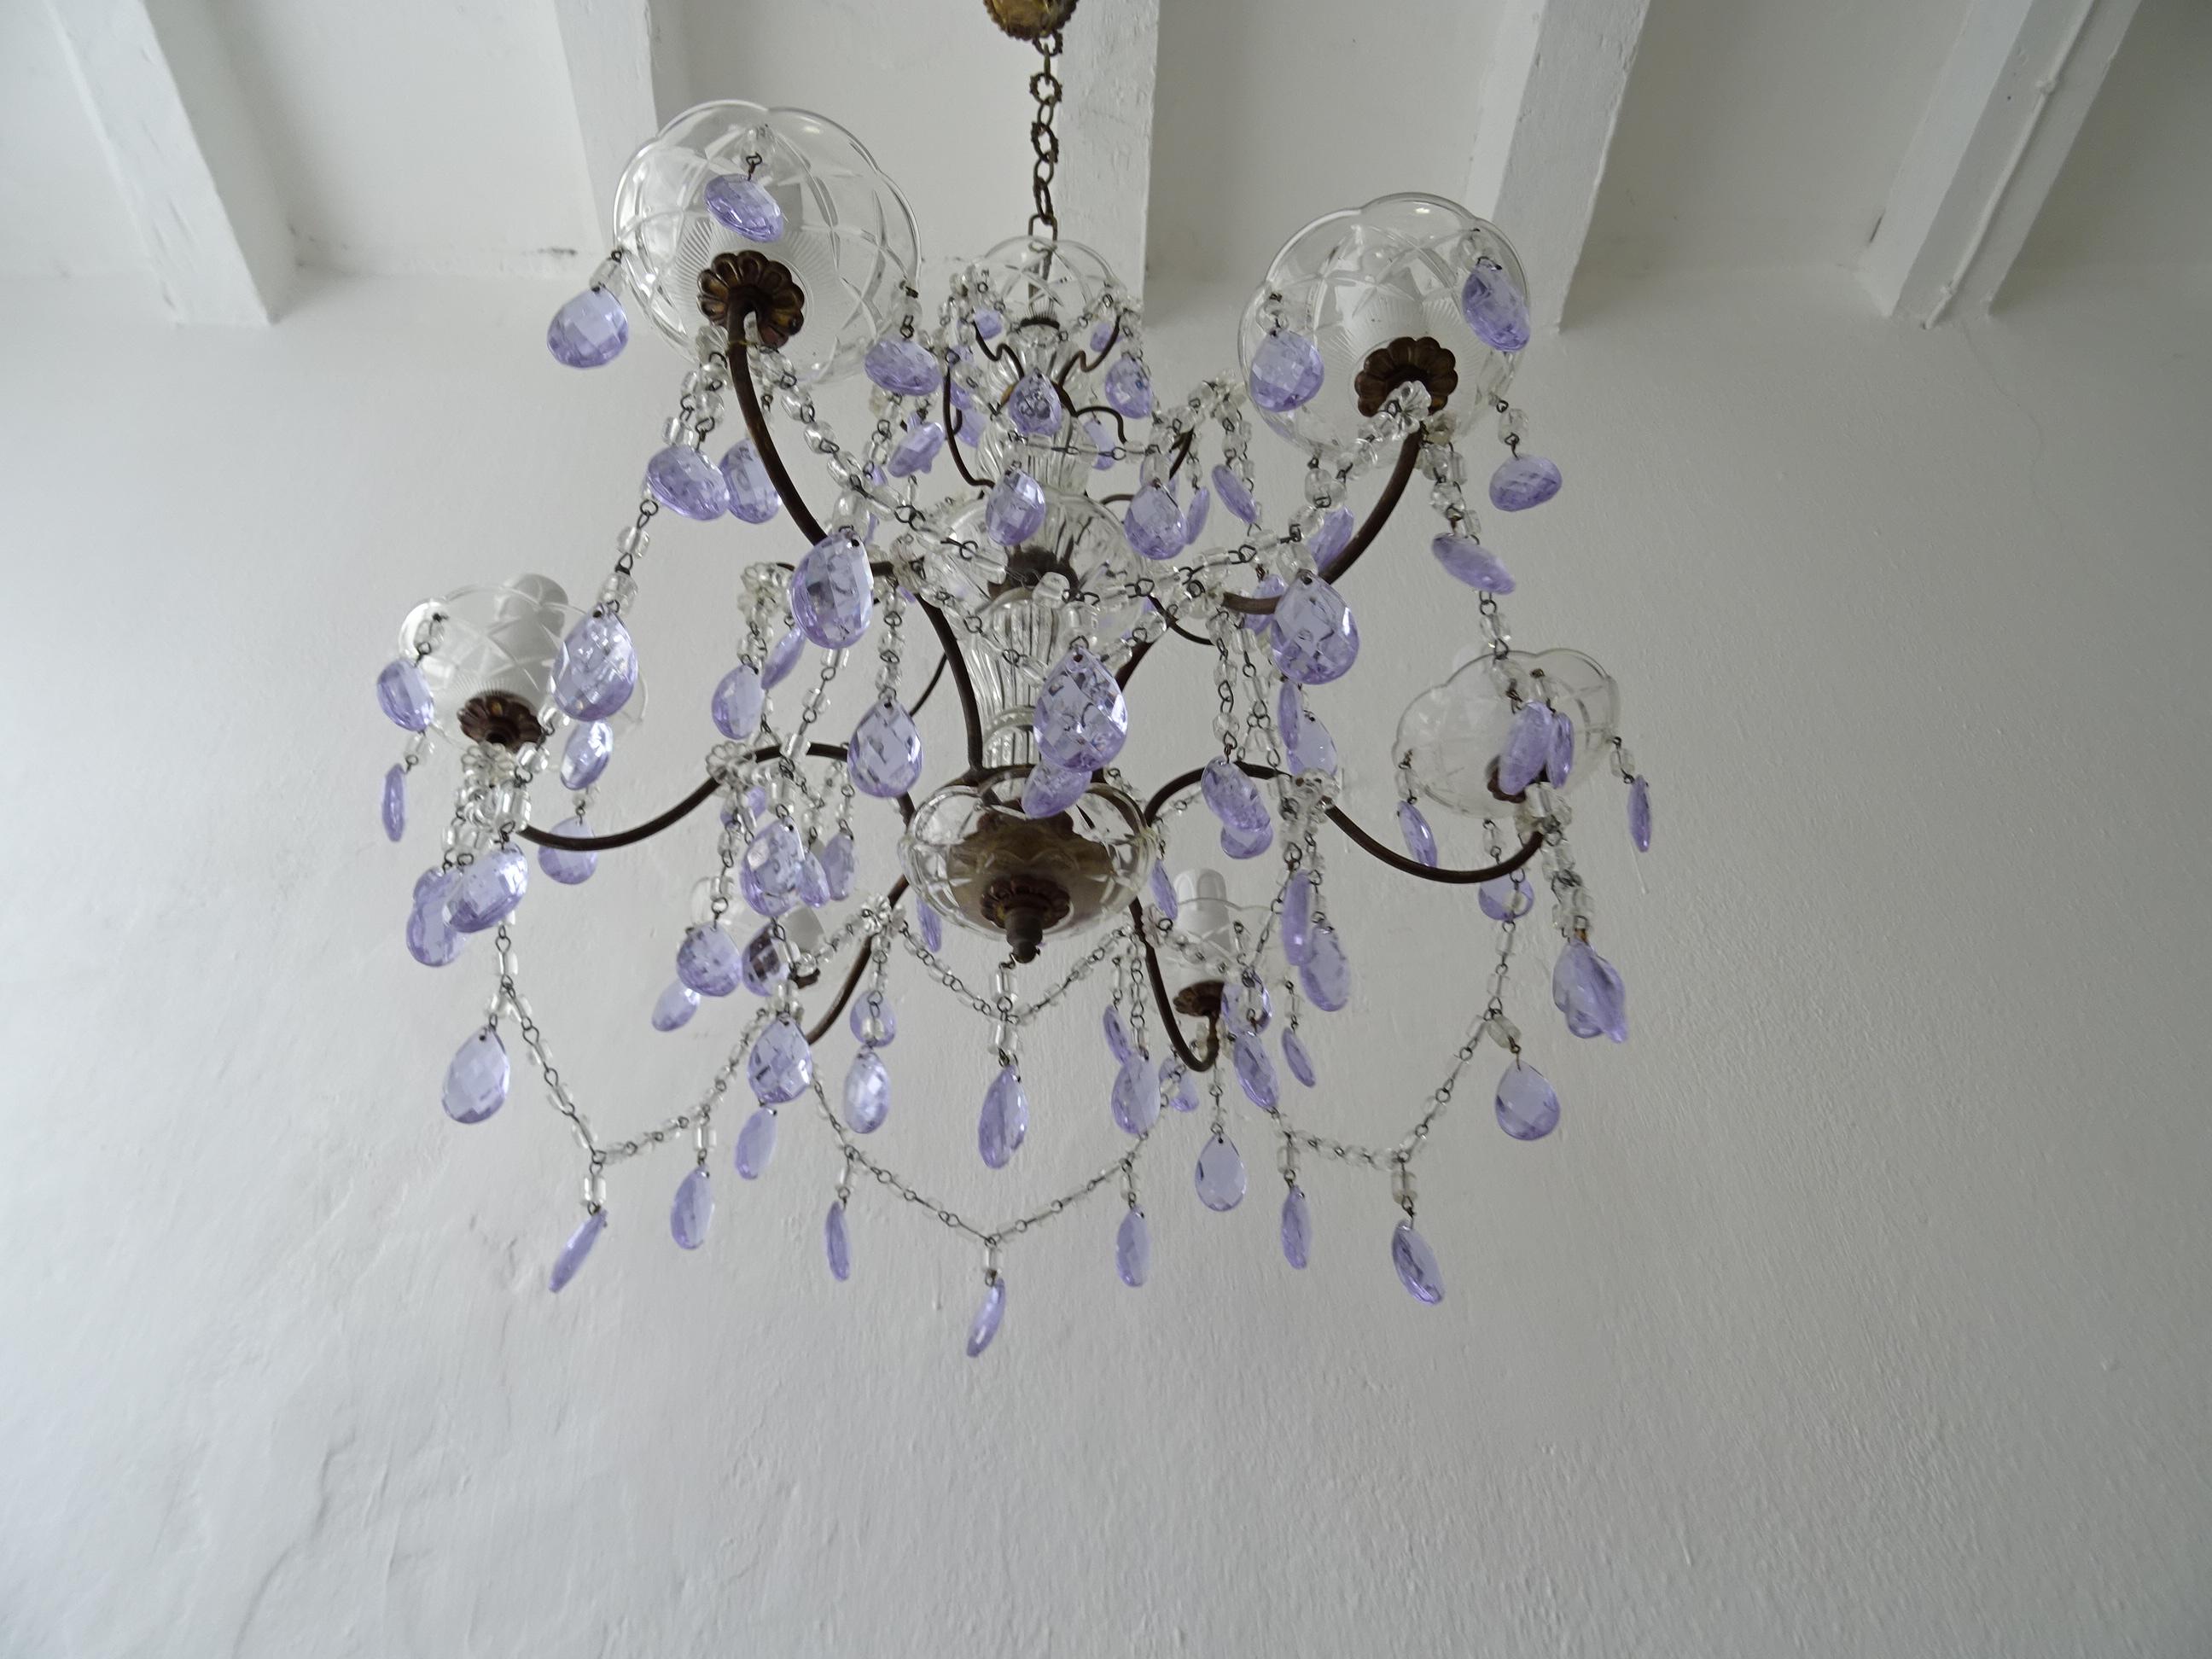 French Provincial French Rare Lavender Purple Crystal Prisms Murano Chandelier, circa 1920 For Sale